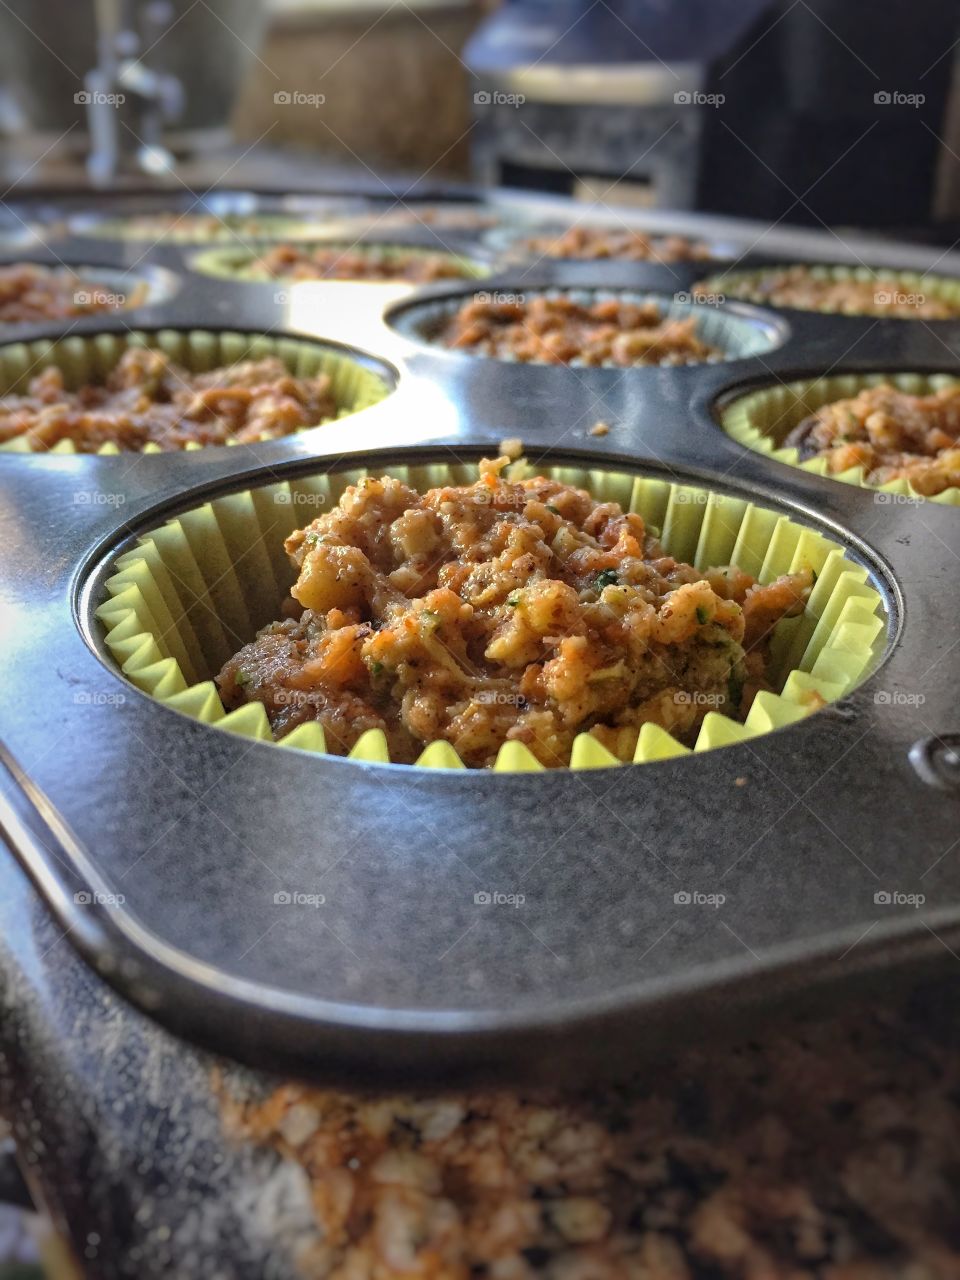 Healthy vegetarian pre-baked "Superhero" muffins from Run Fast. Eat Slow.